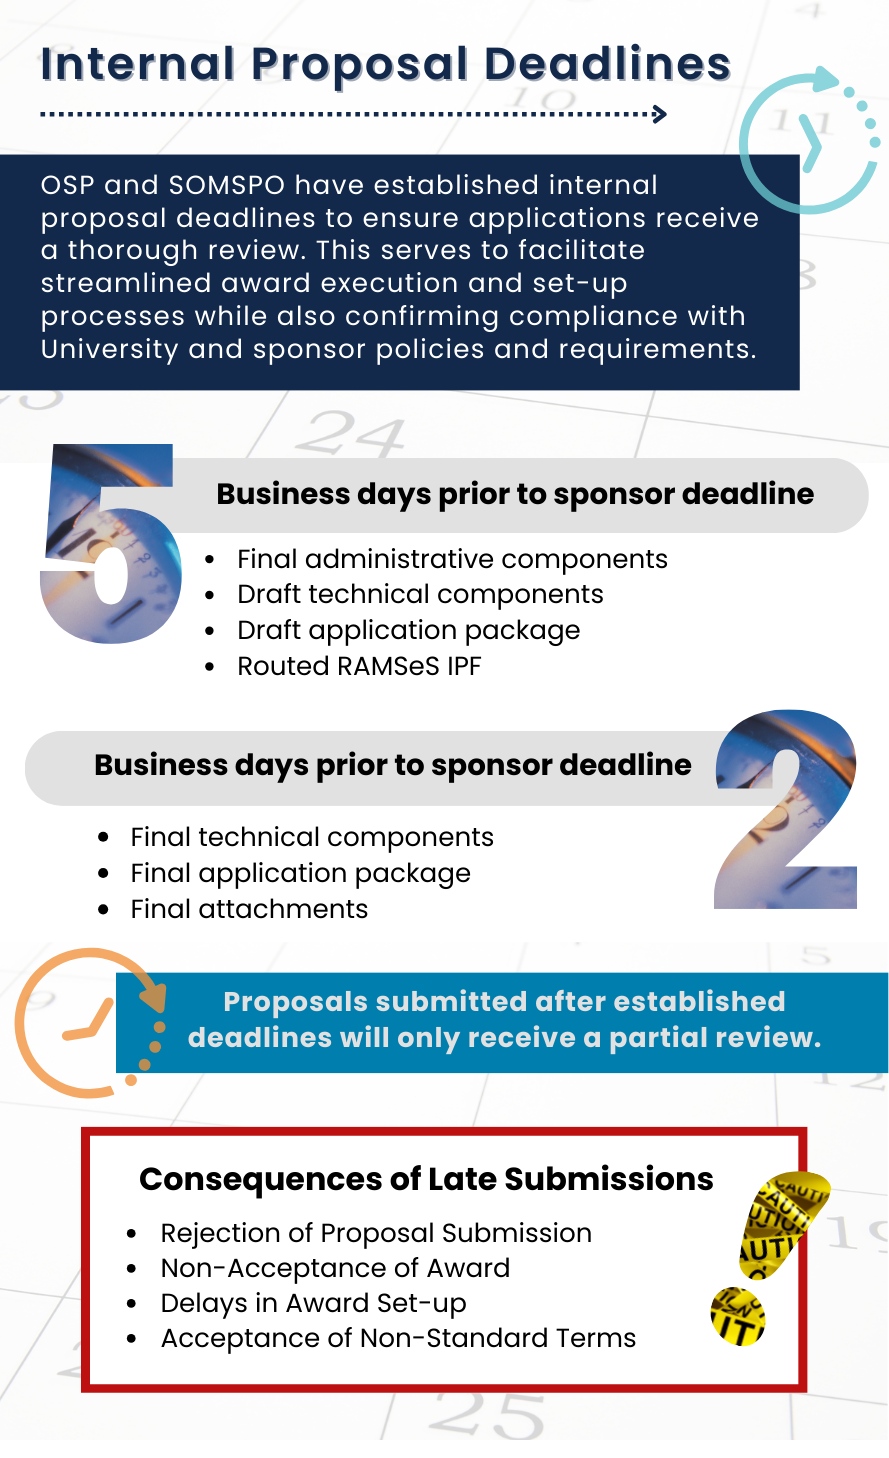 Internal Proposal Deadlines checklist: 5 days before sponsor deadline, 2 business days before, and late submission consequences